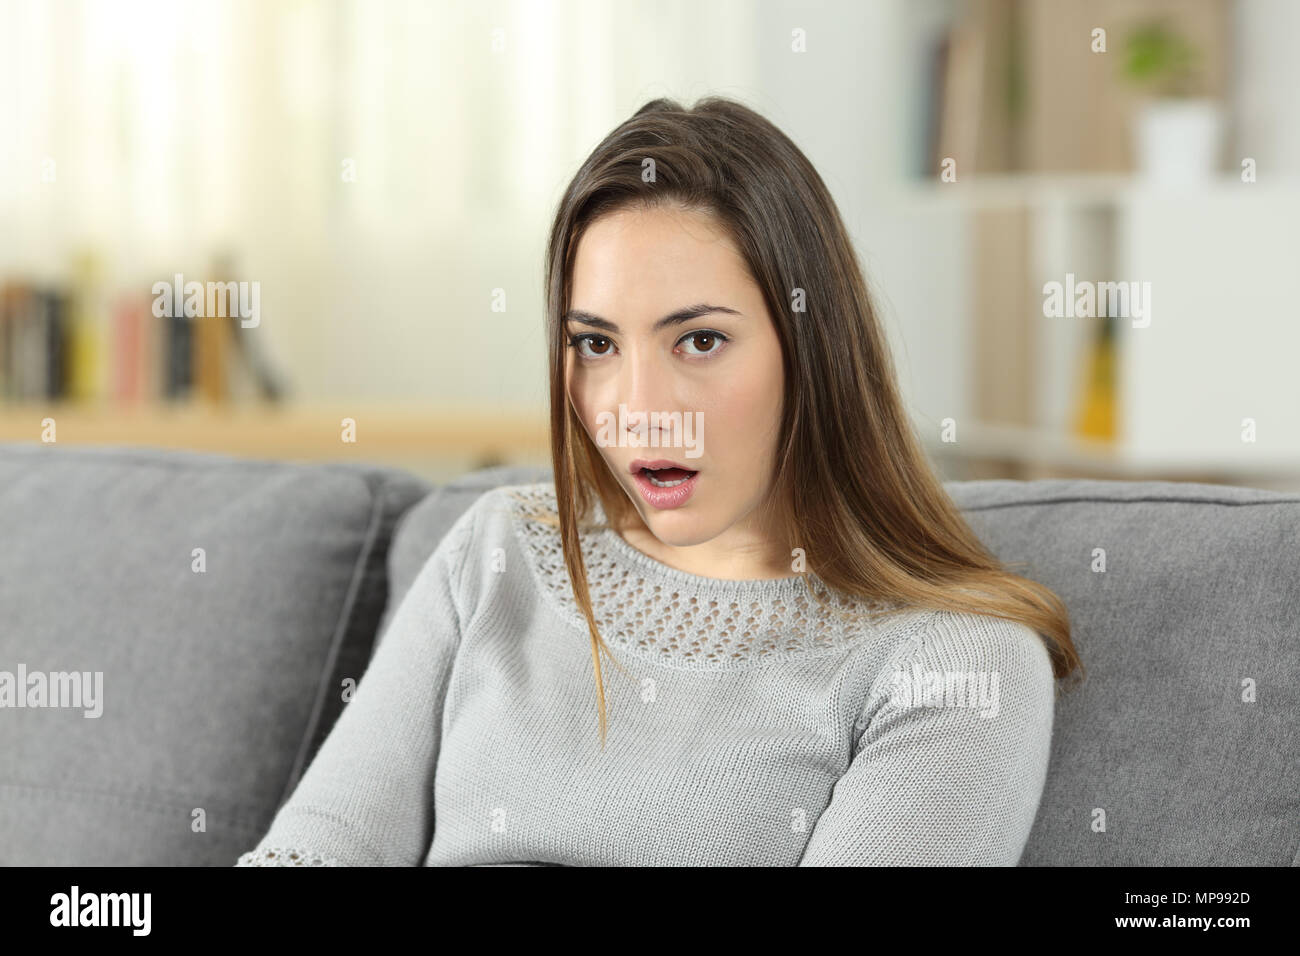 Portrait Of A Perplexed Woman Looking At Camera Sitting On A Couch In The Living Room At Home